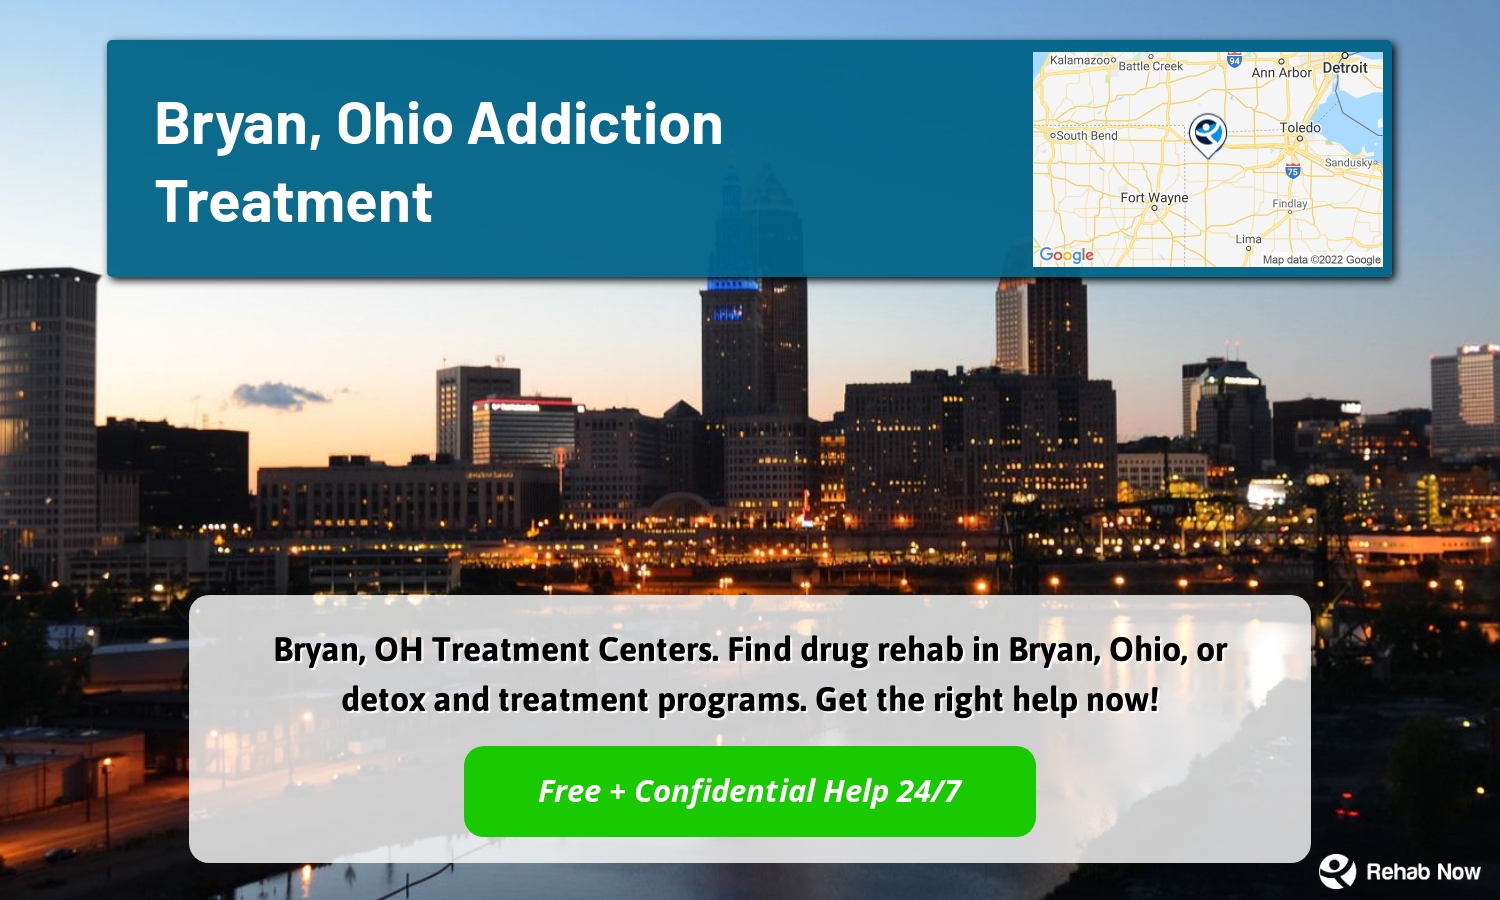 Bryan, OH Treatment Centers. Find drug rehab in Bryan, Ohio, or detox and treatment programs. Get the right help now!